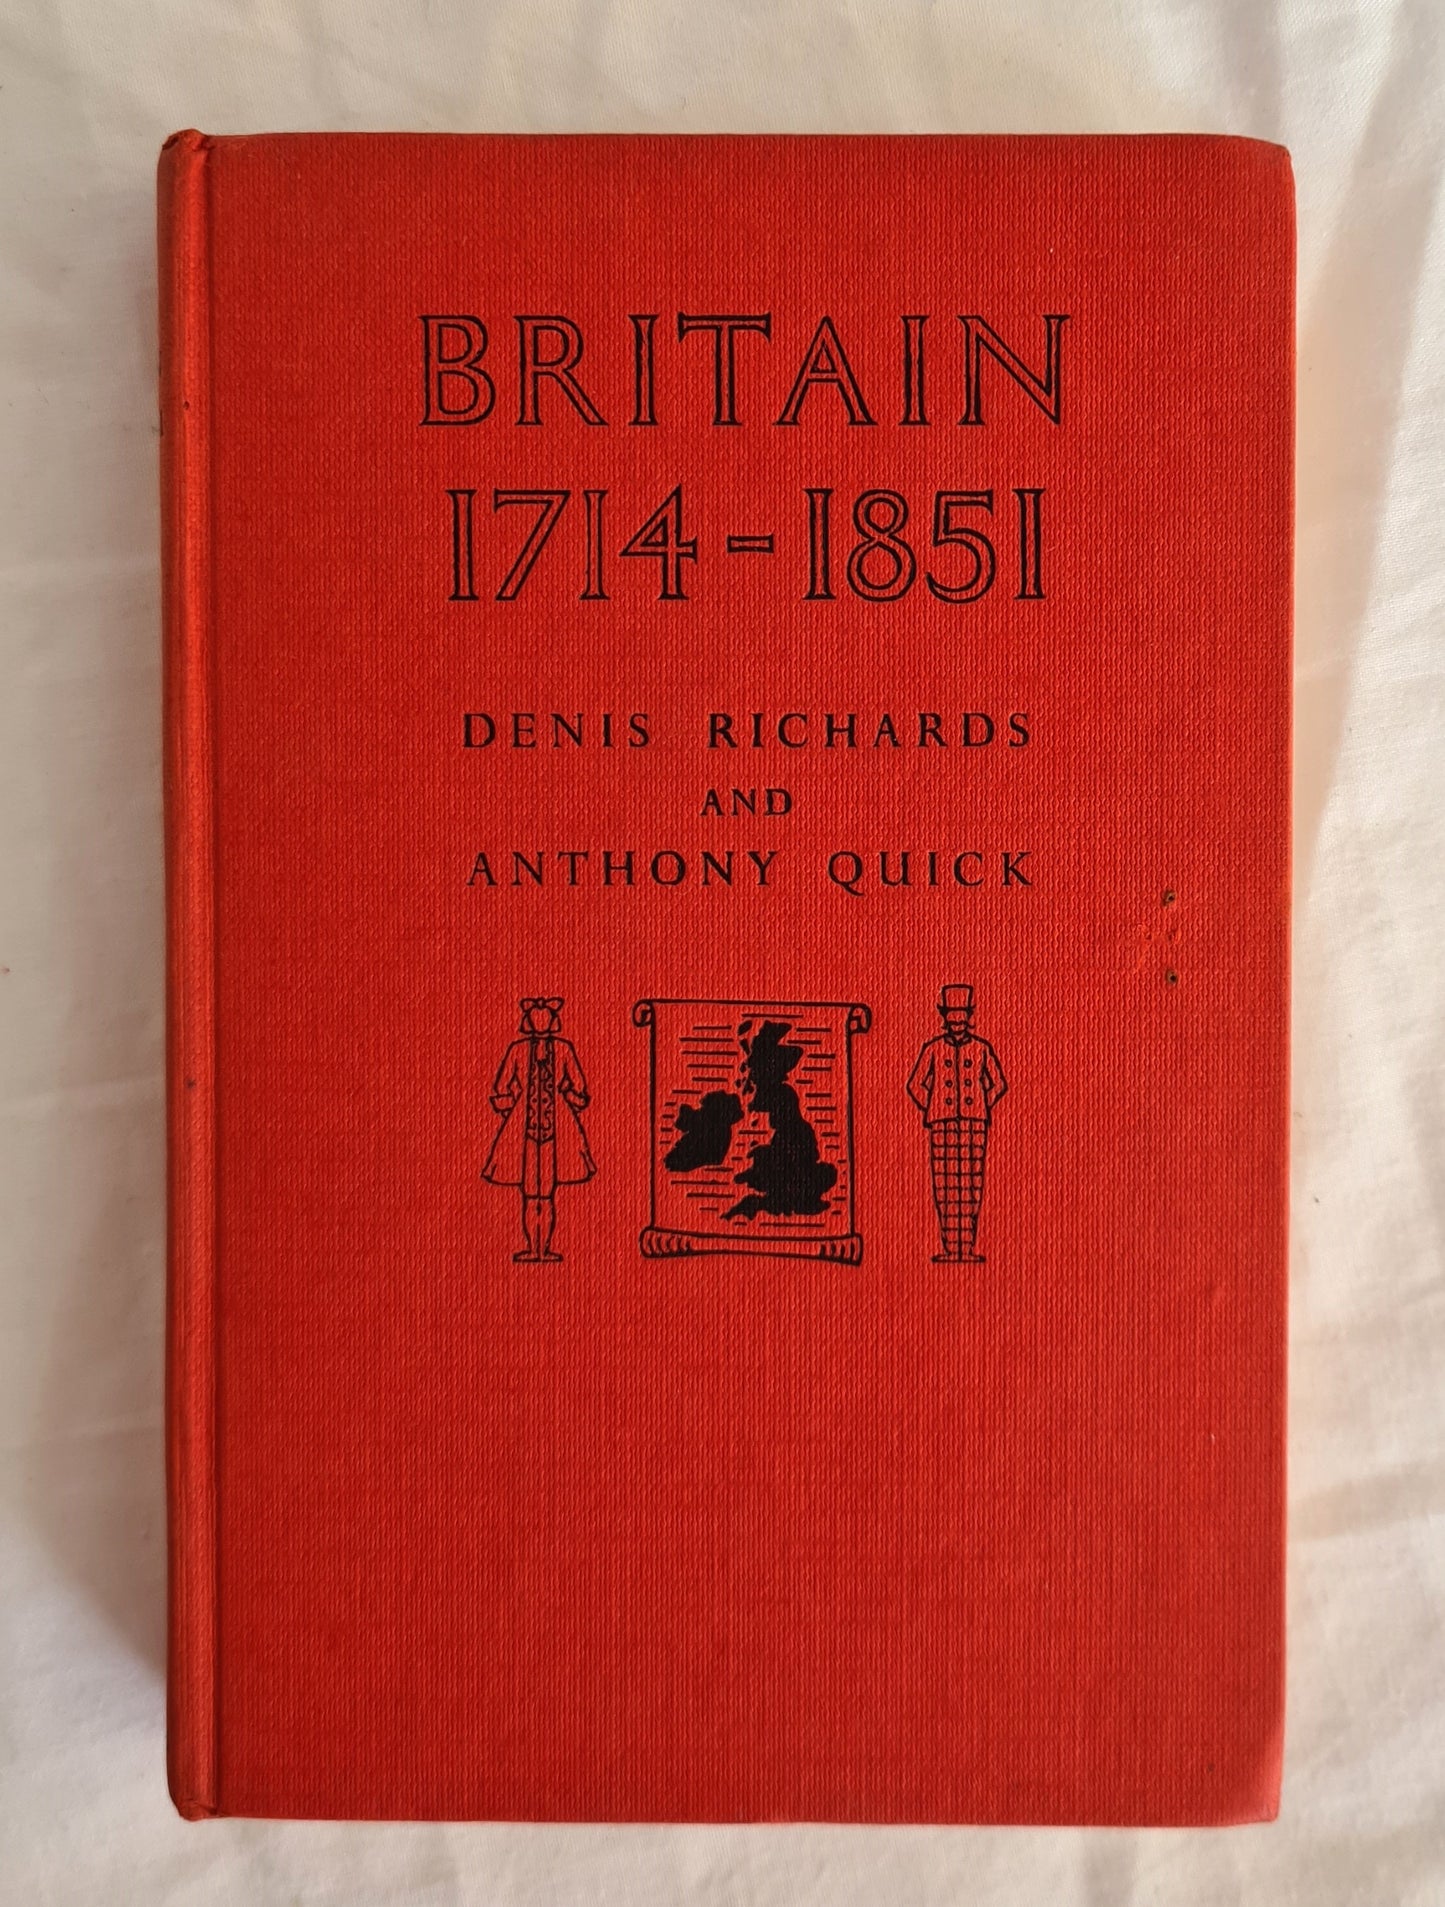 Britain 1714-1851 by Denis Richards and Anthony Quick